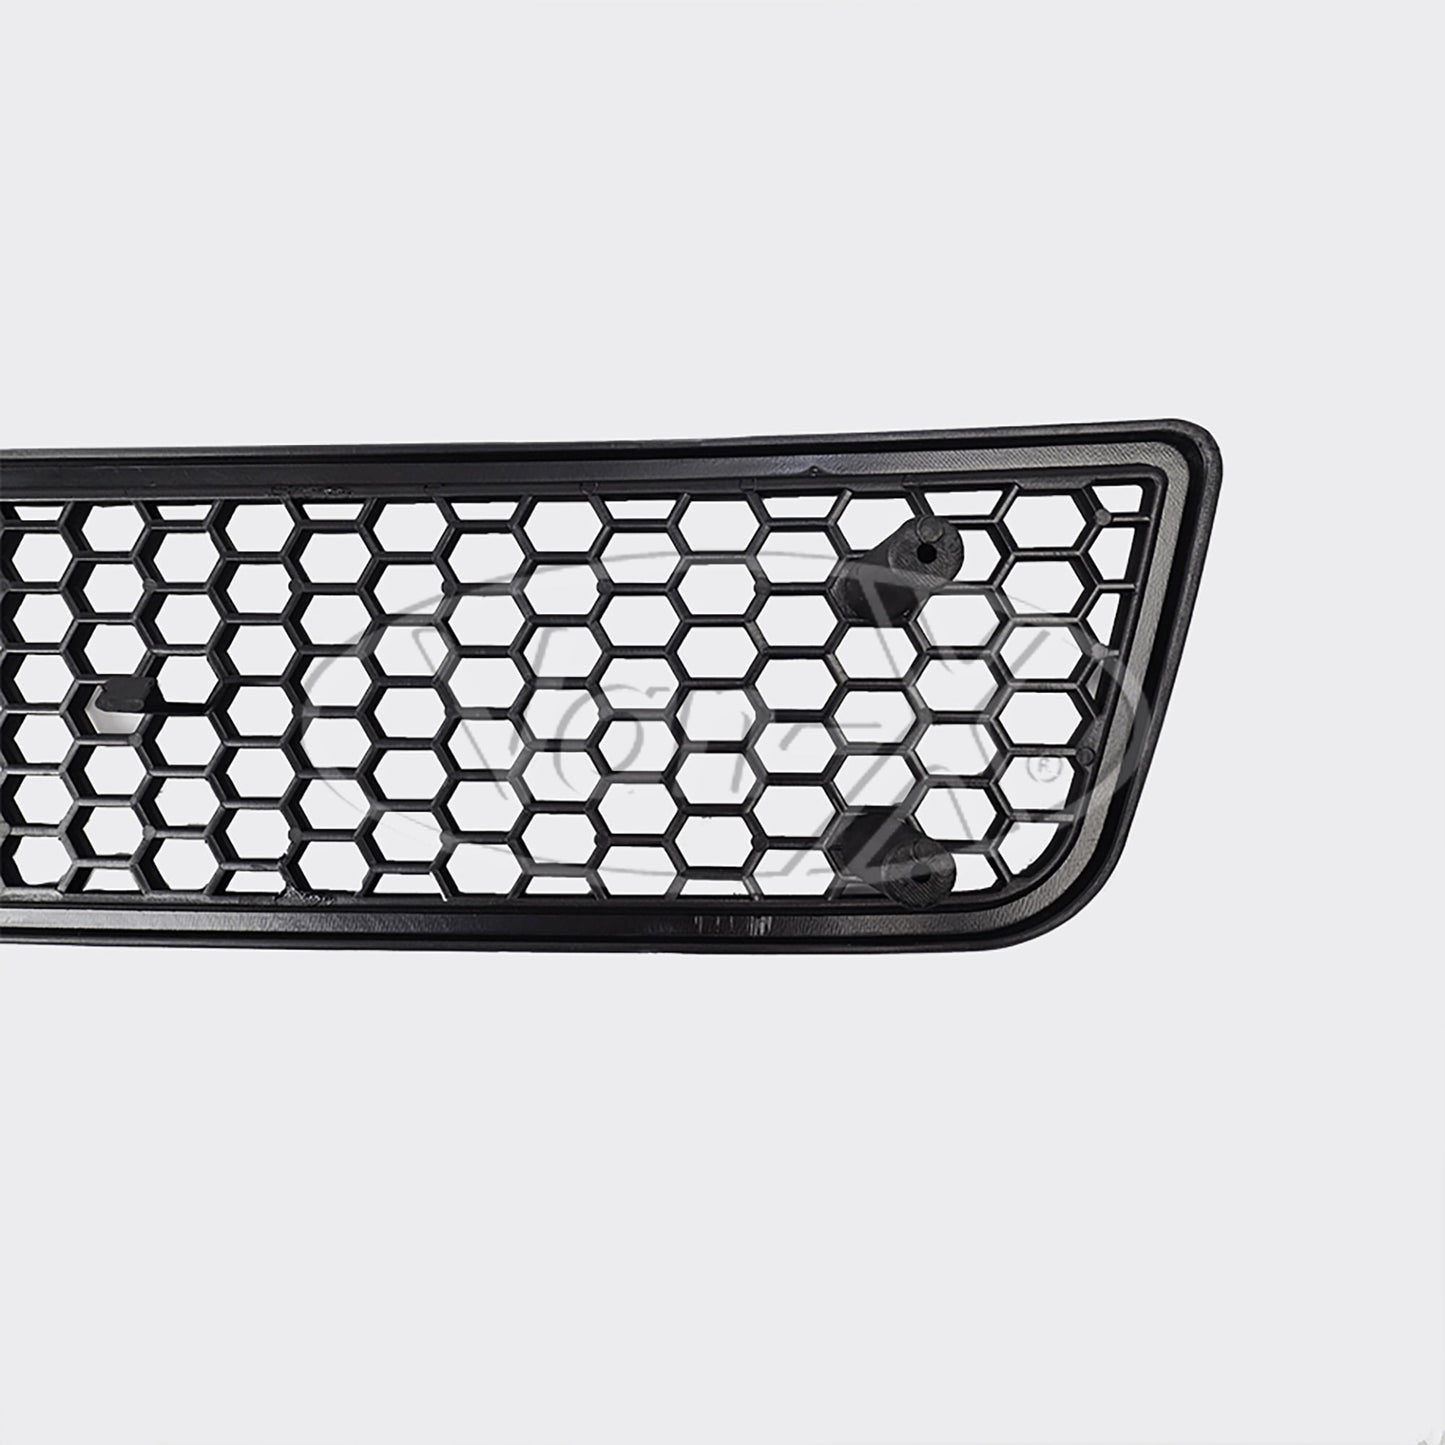 VW T5.1 Transporter Honeycomb Matte Black Bumper Grille + Fog Light Trims + Number Plate Trim Sportline Painted and Ready to Fit